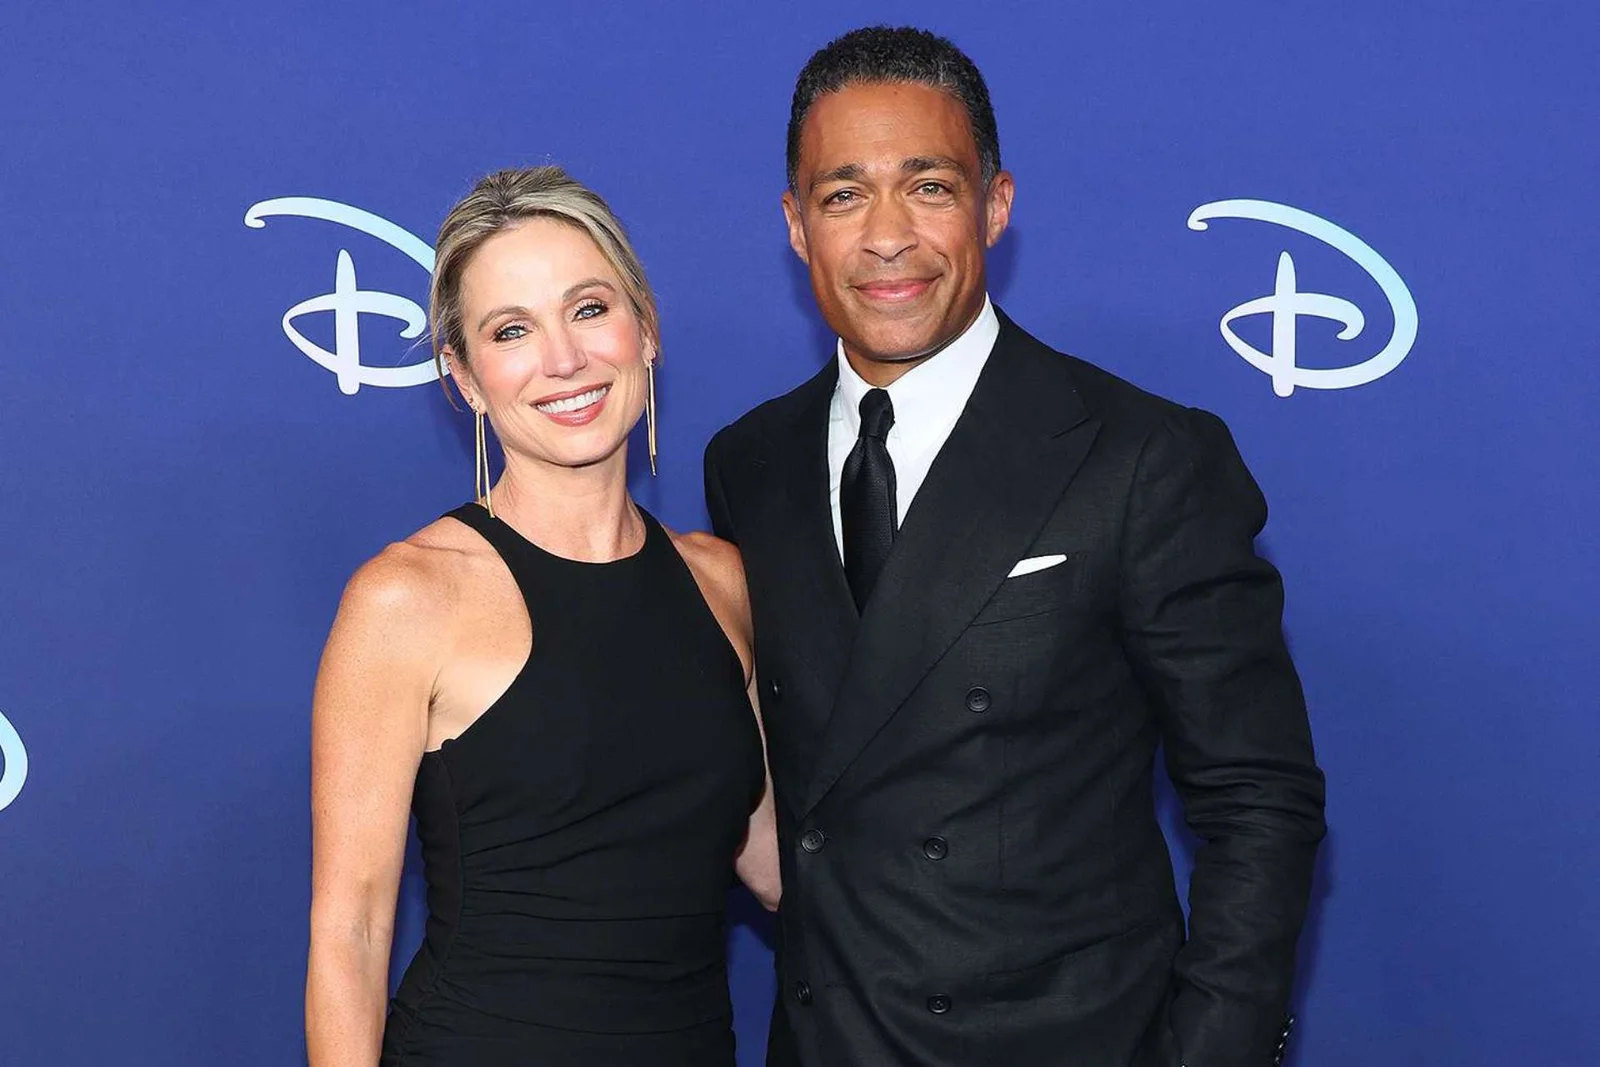 Former Good Morning America Co-Anchors Amy Robach and T.J. Holmes Express Emotions Over Career Challenges"